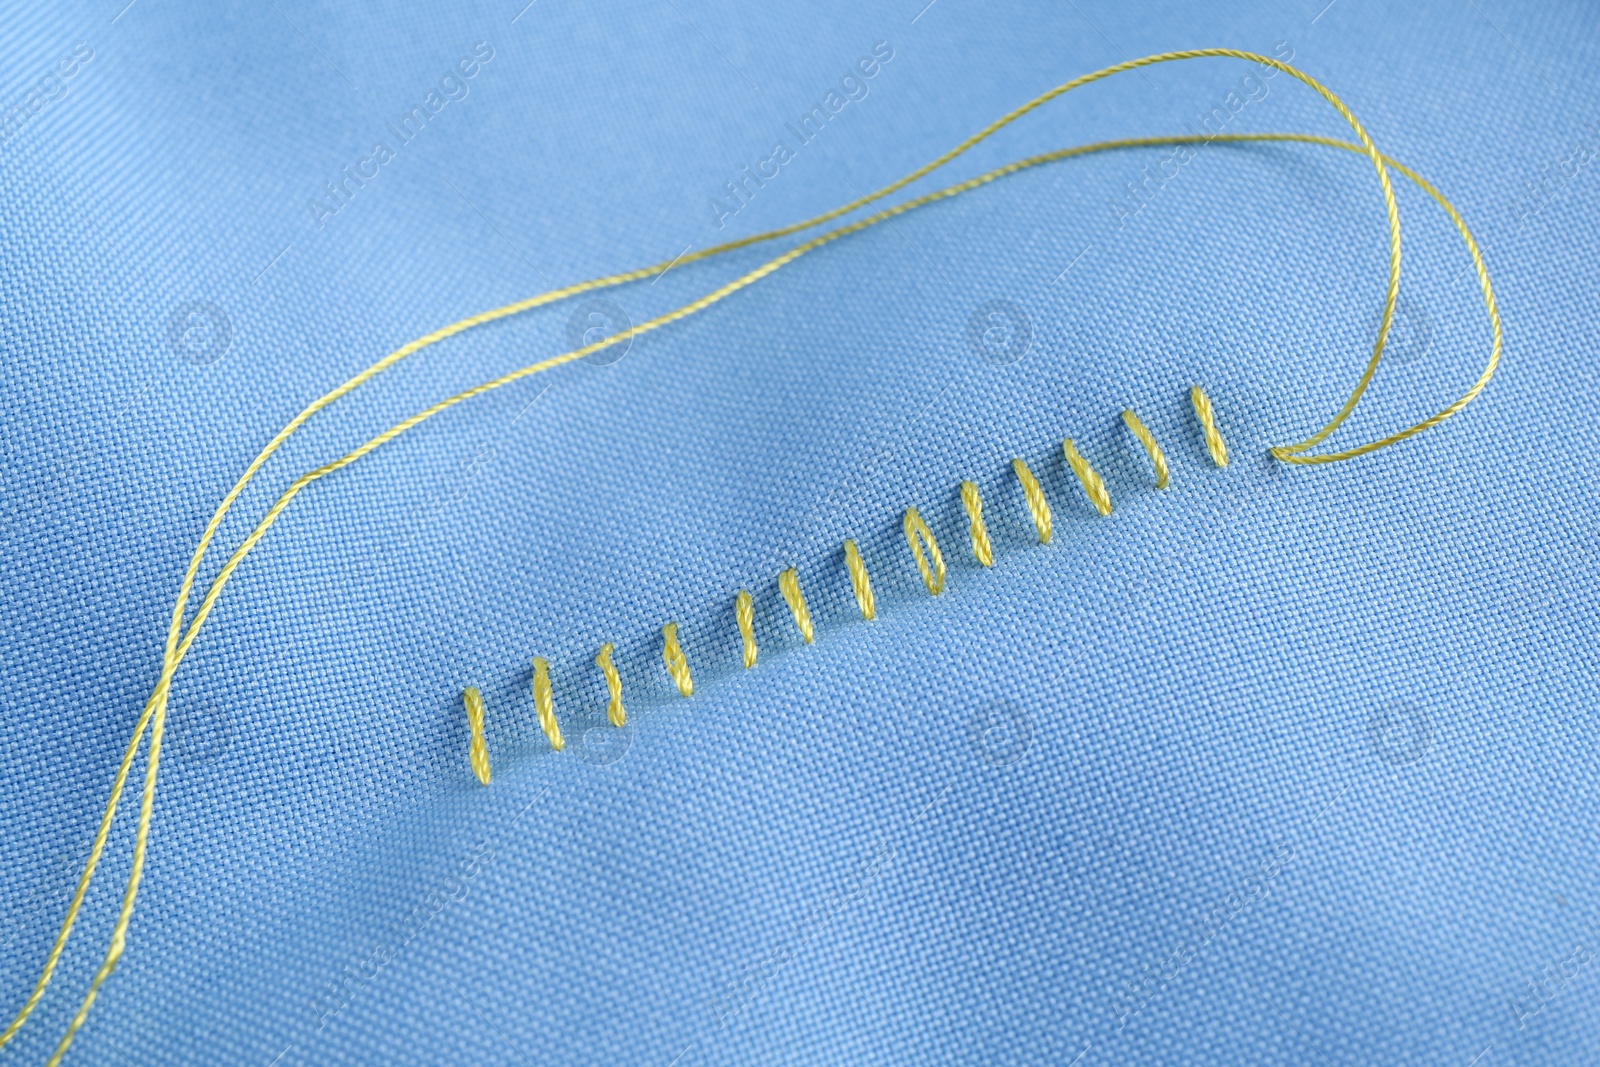 Photo of Sewing thread and stitches on light blue cloth, top view